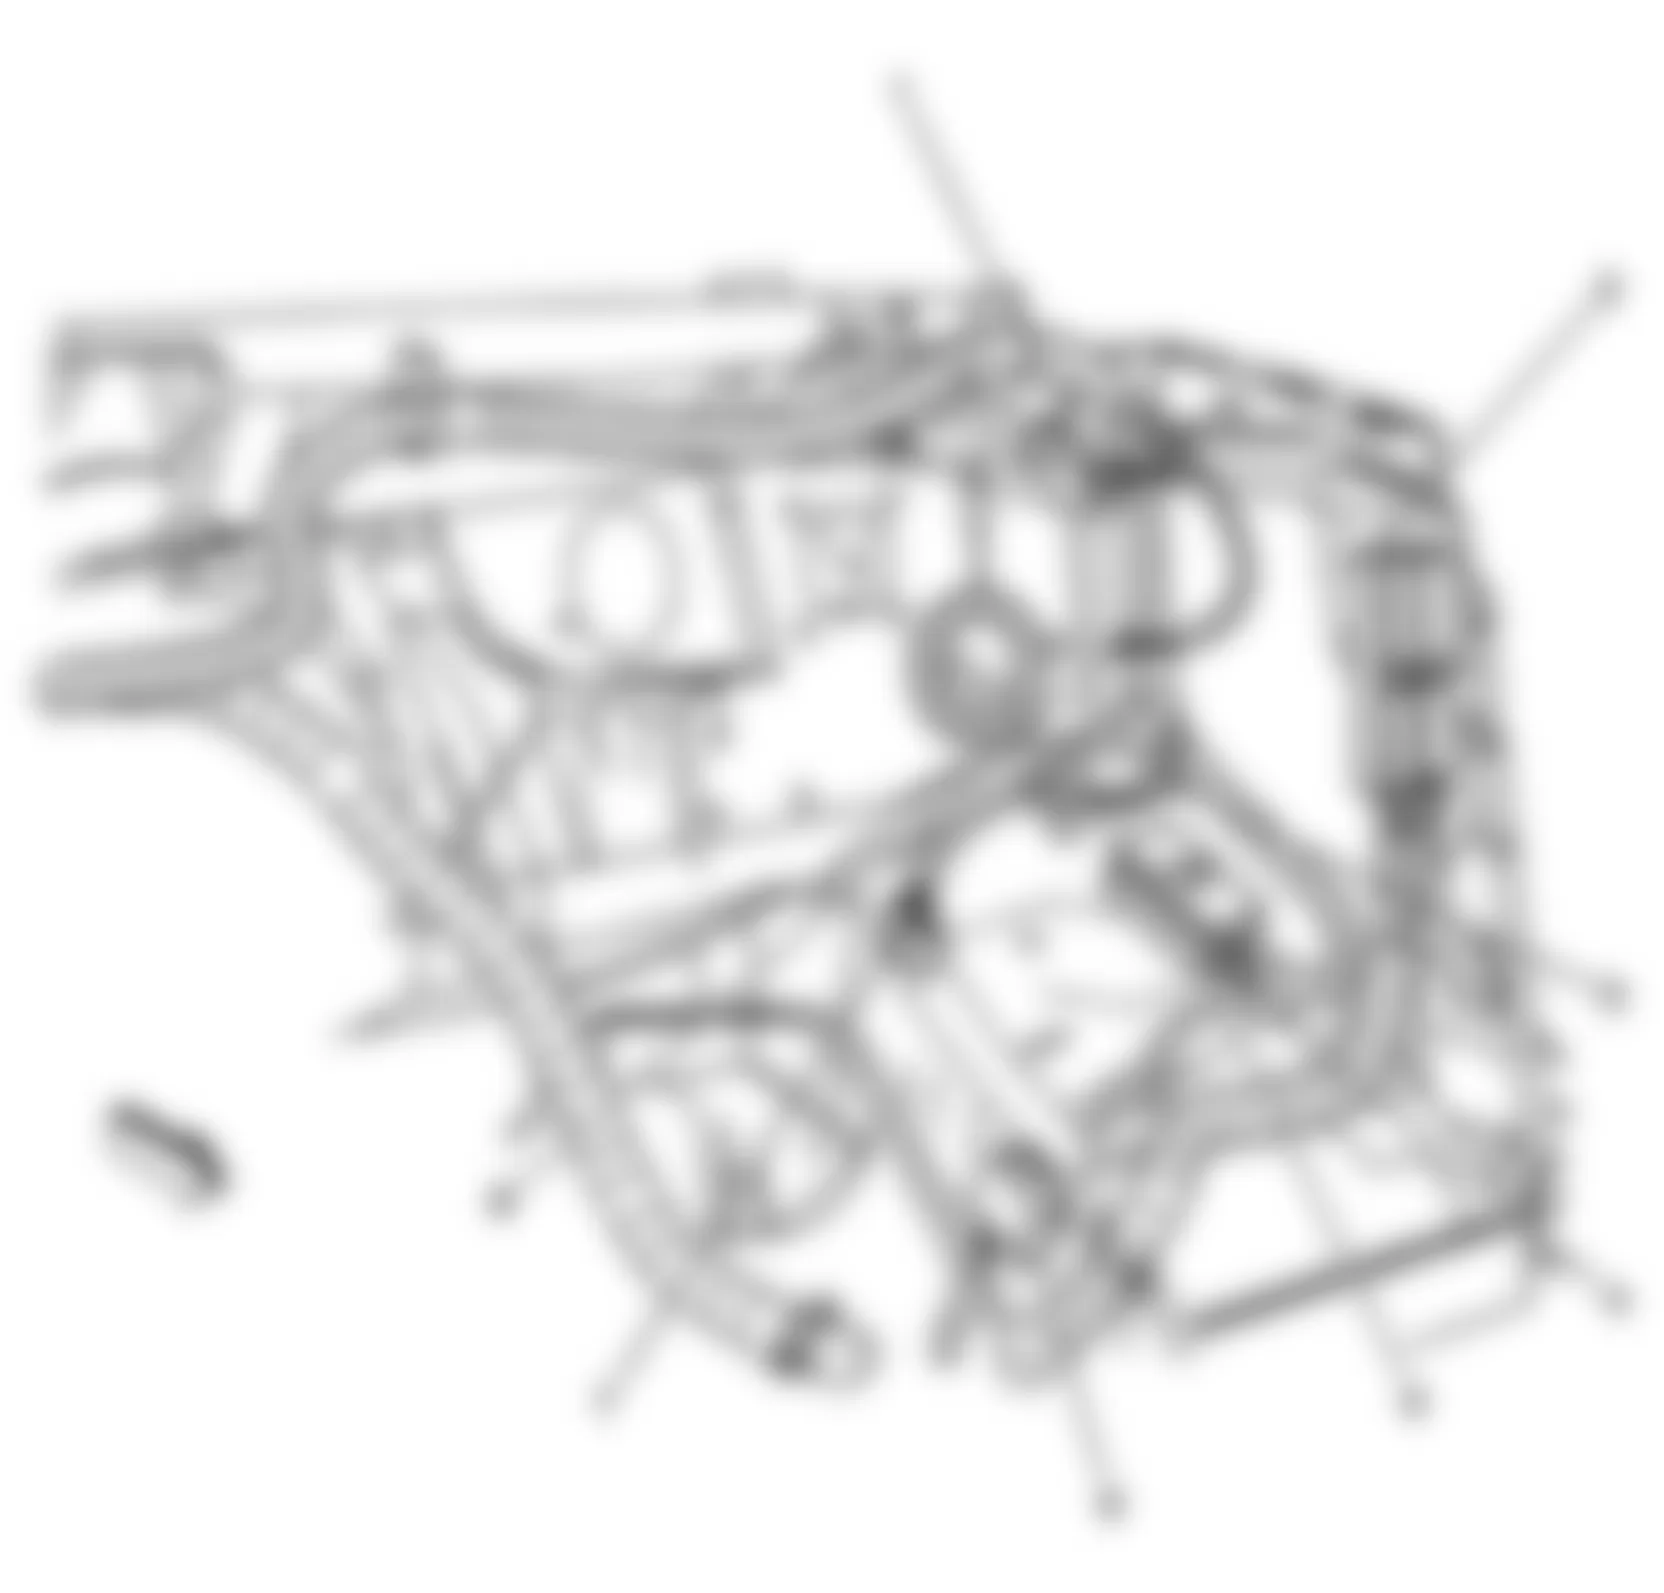 GMC Savana G3500 2010 - Component Locations -  Left Rear Of Engine Compartment